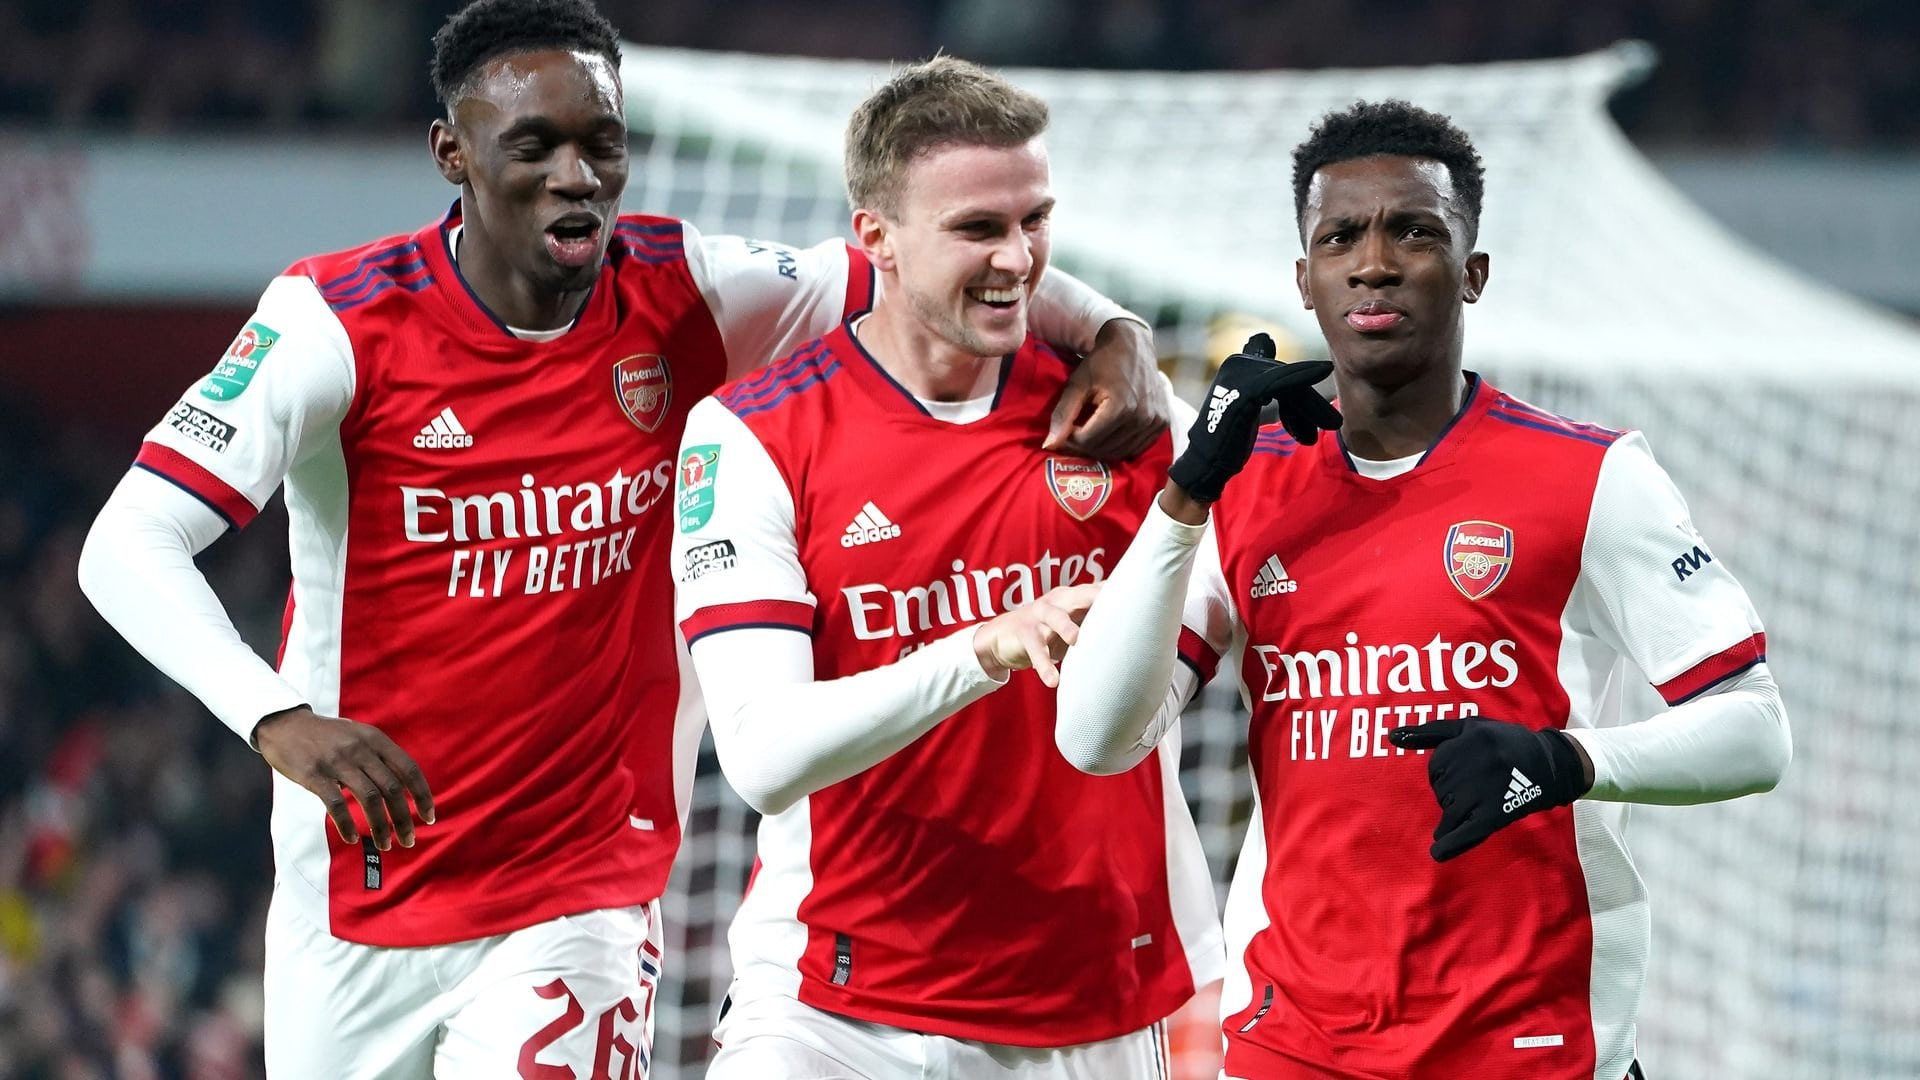 Arsenal favorites to make it three wins in a row